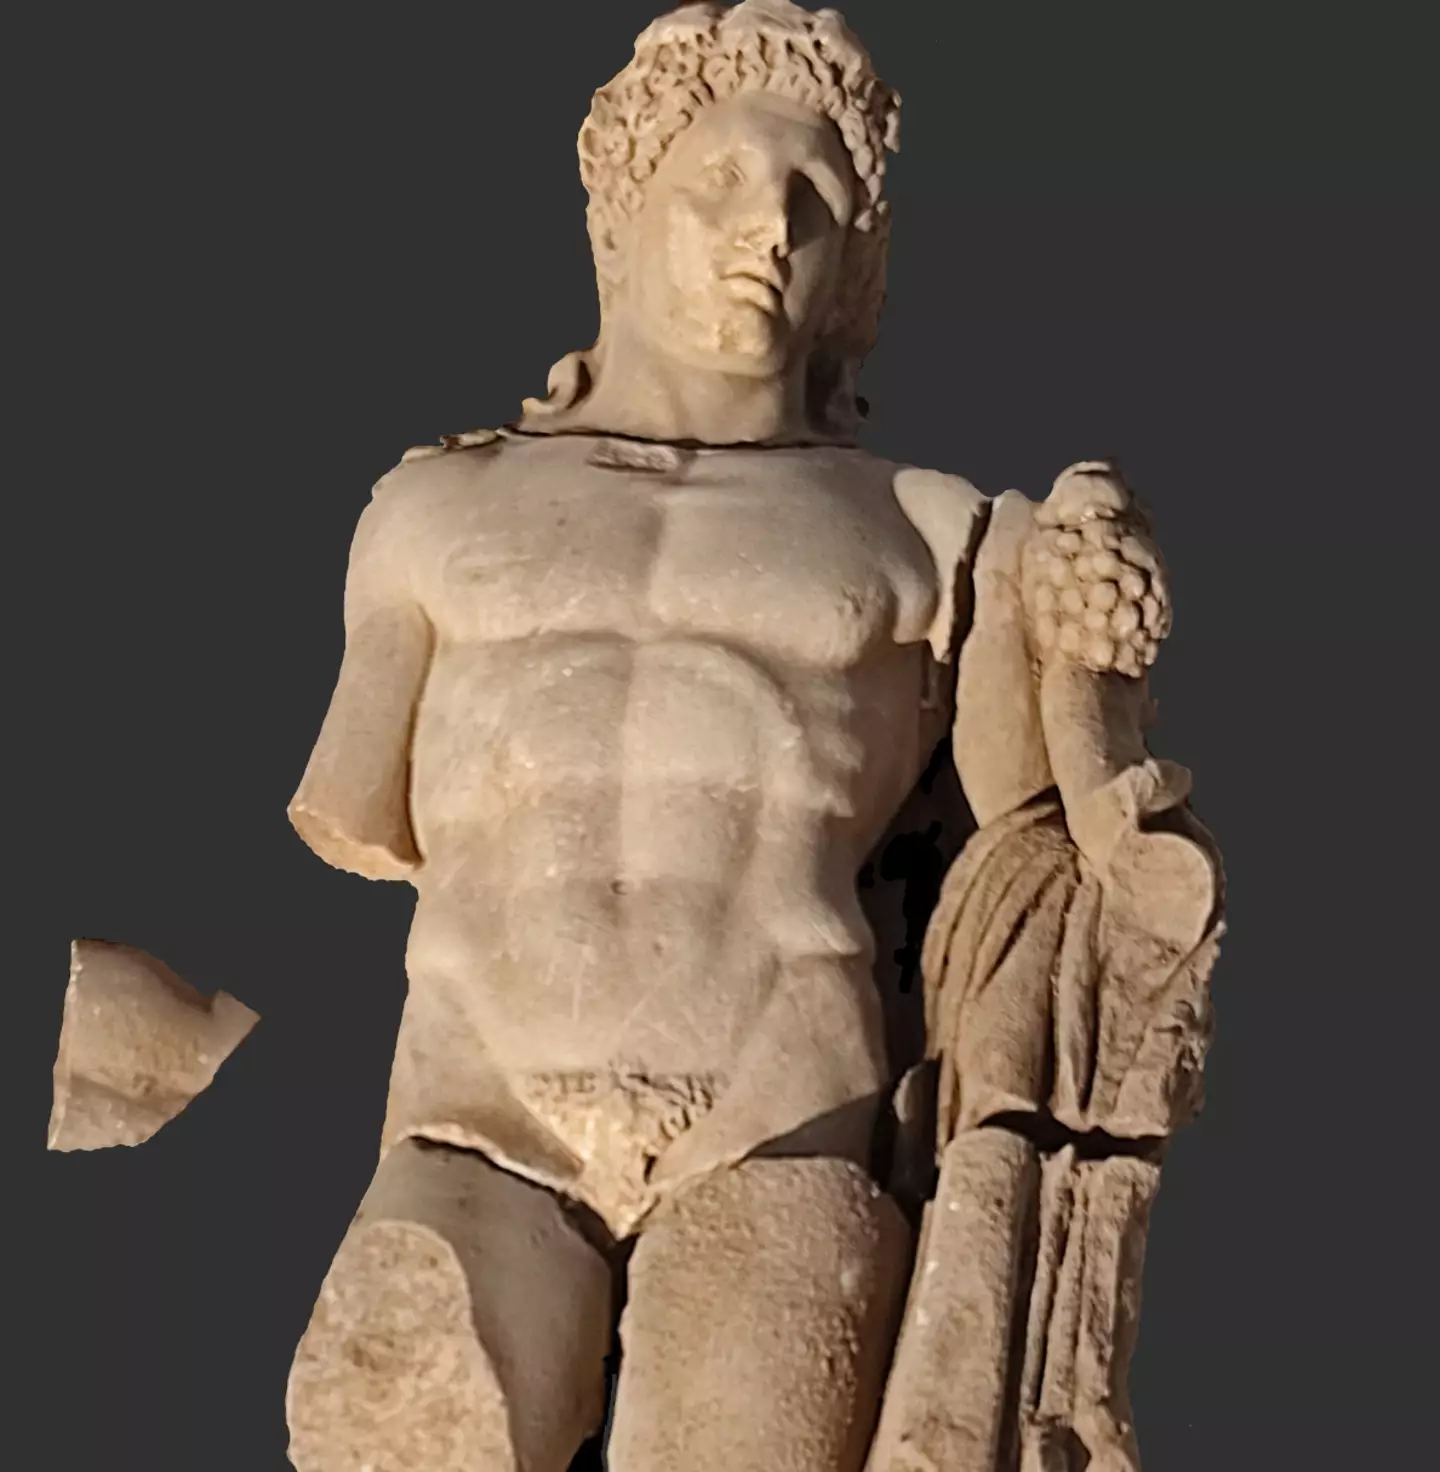 A statue of Hercules believed to be around 2,000 years old was found near ruins dating back to the 8th or 9th century. Twitter/@cultureGR